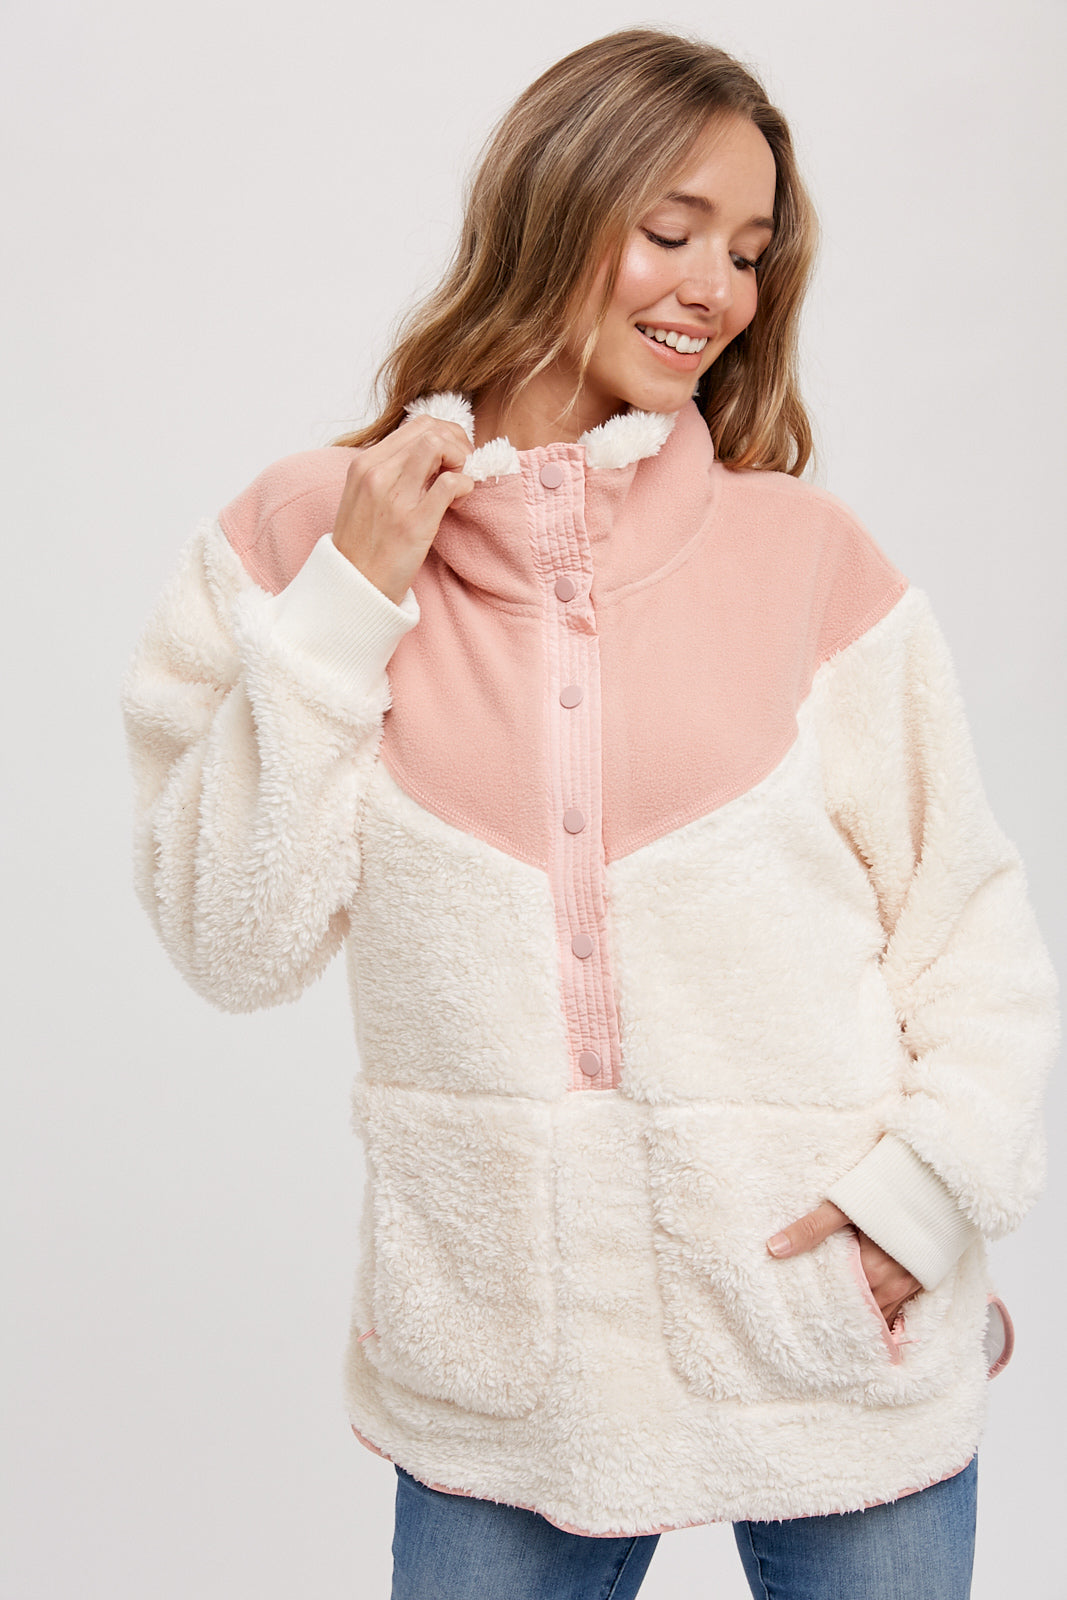 The Kinley Sweater